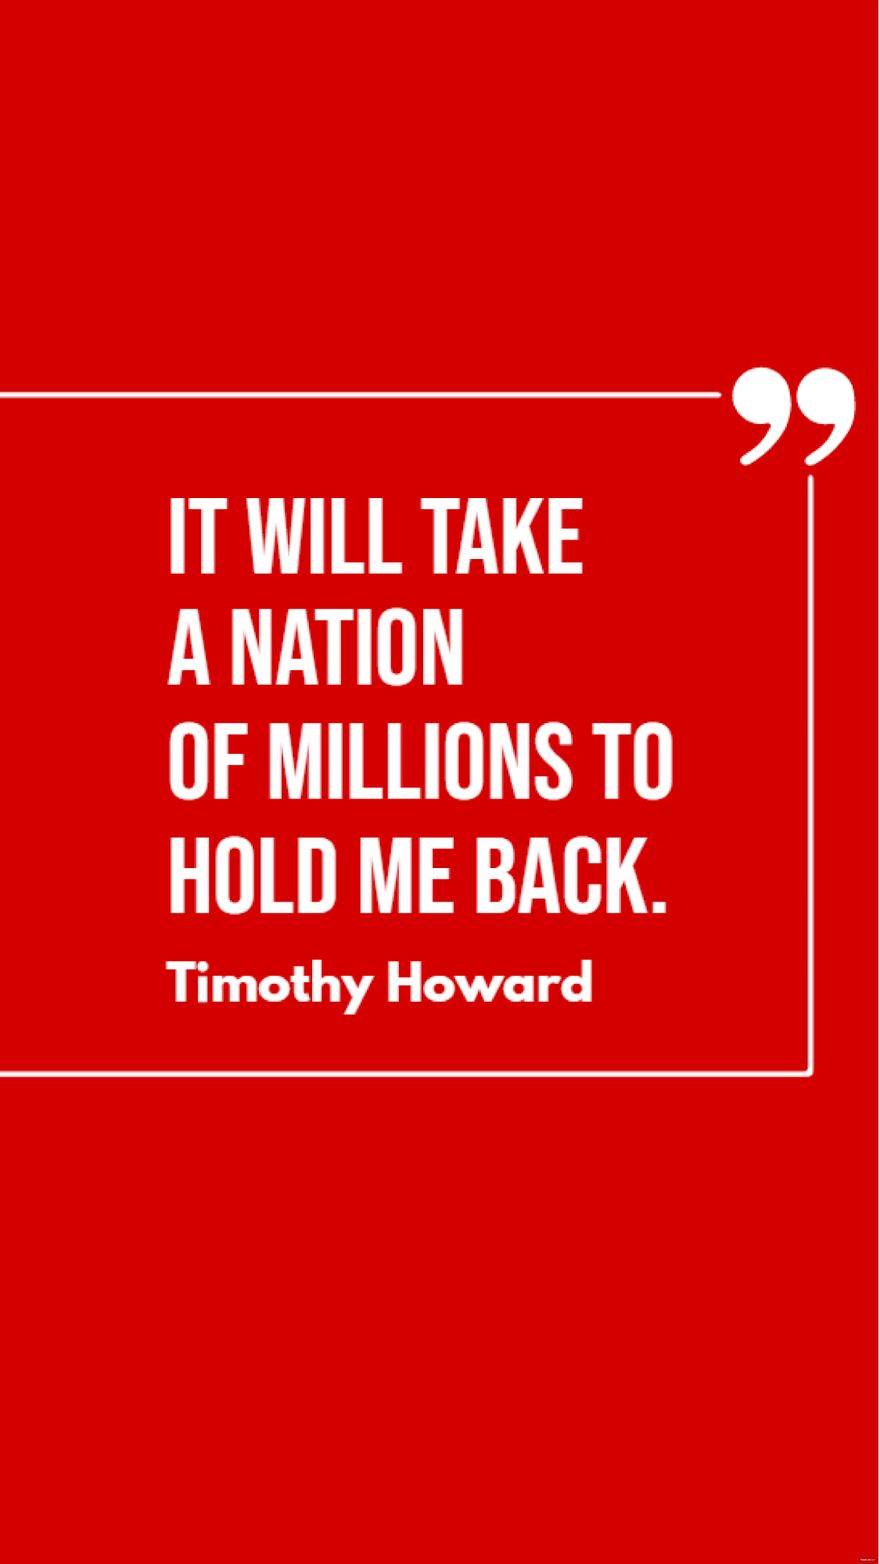 Timothy Howard - It will take a nation of millions to hold me back.